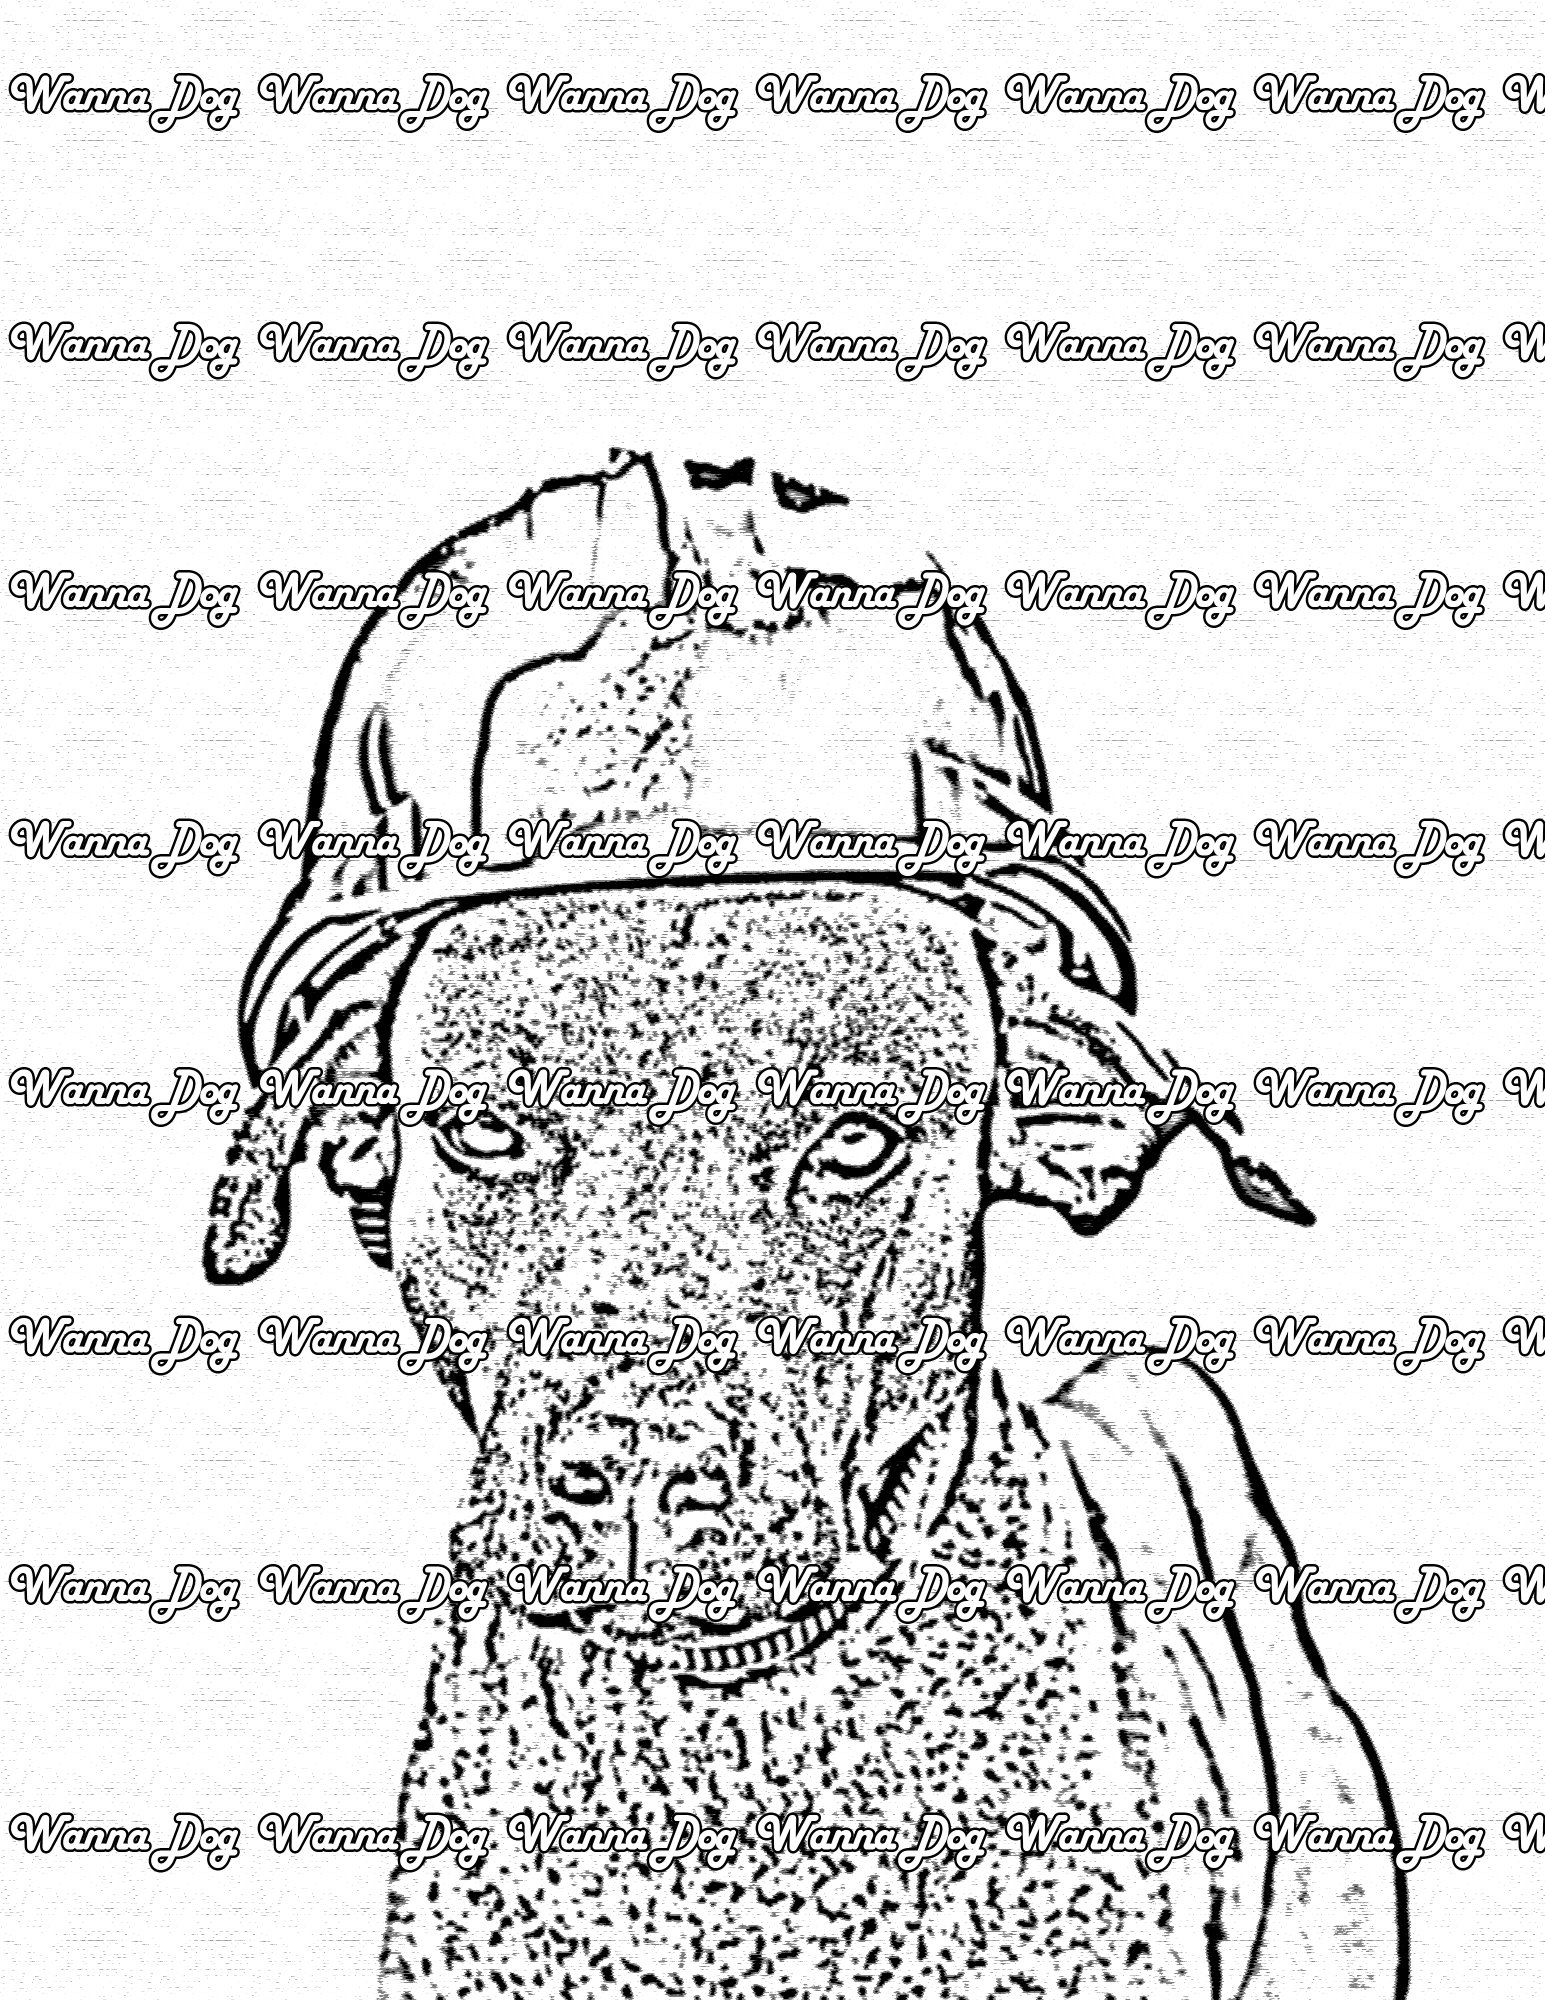 Dachshund Coloring Page of a Dachshund with a construction hat